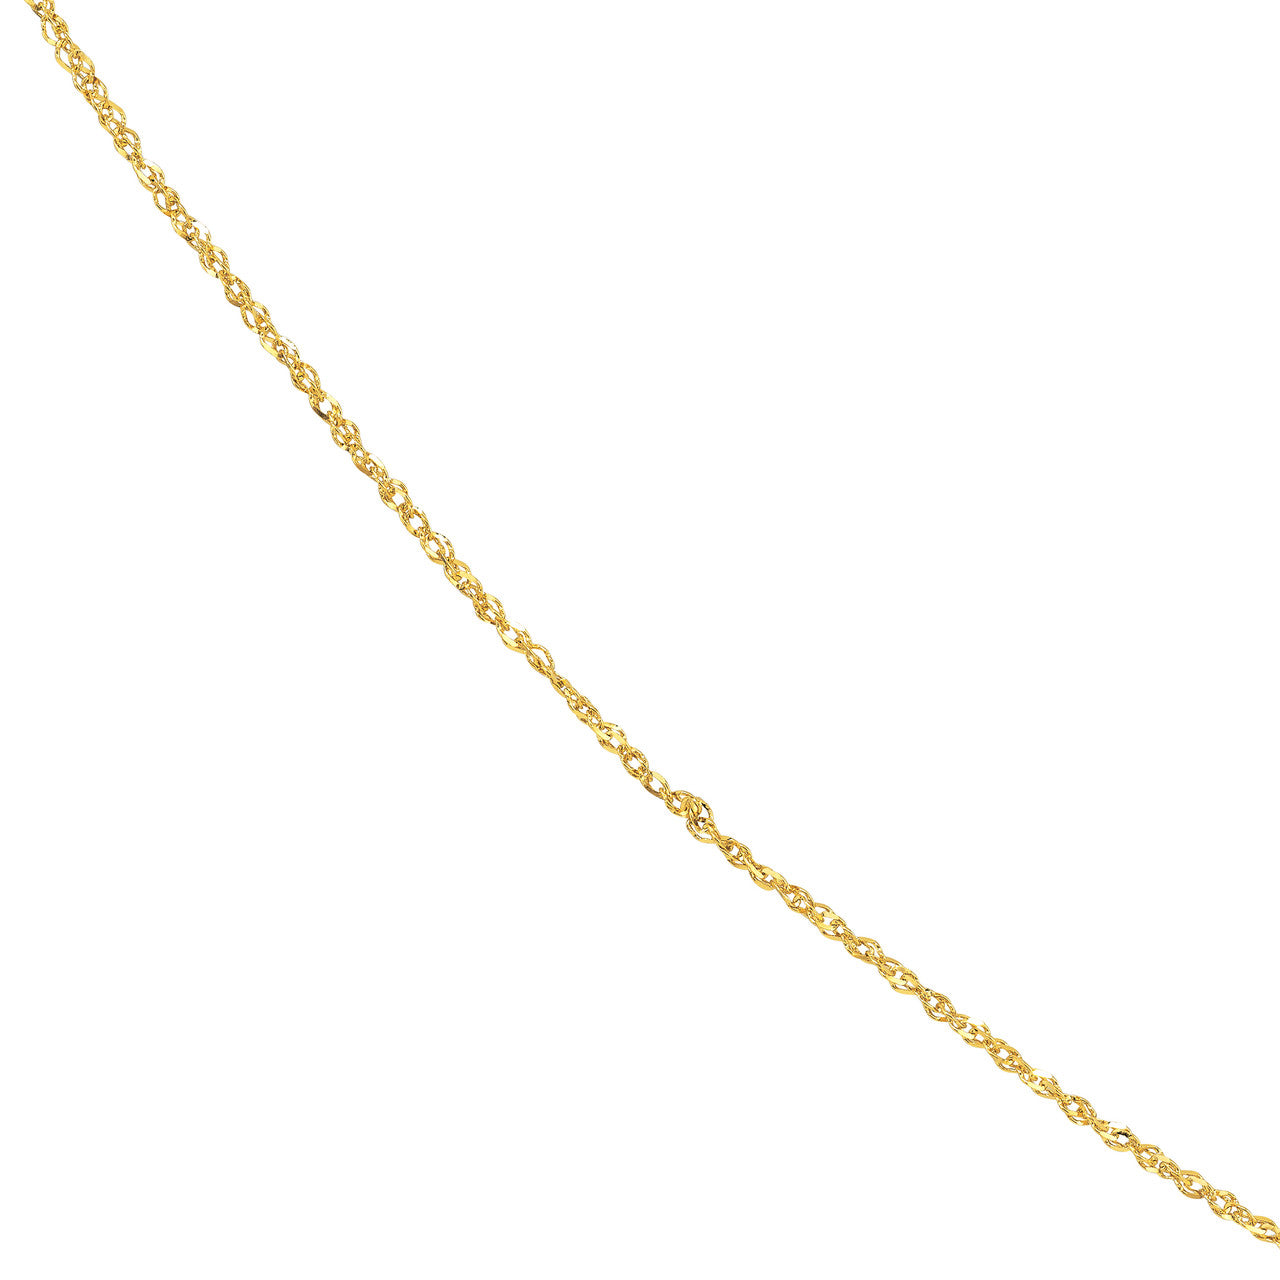 14k Yellow Gold Singapore Chain with Lobster Lock